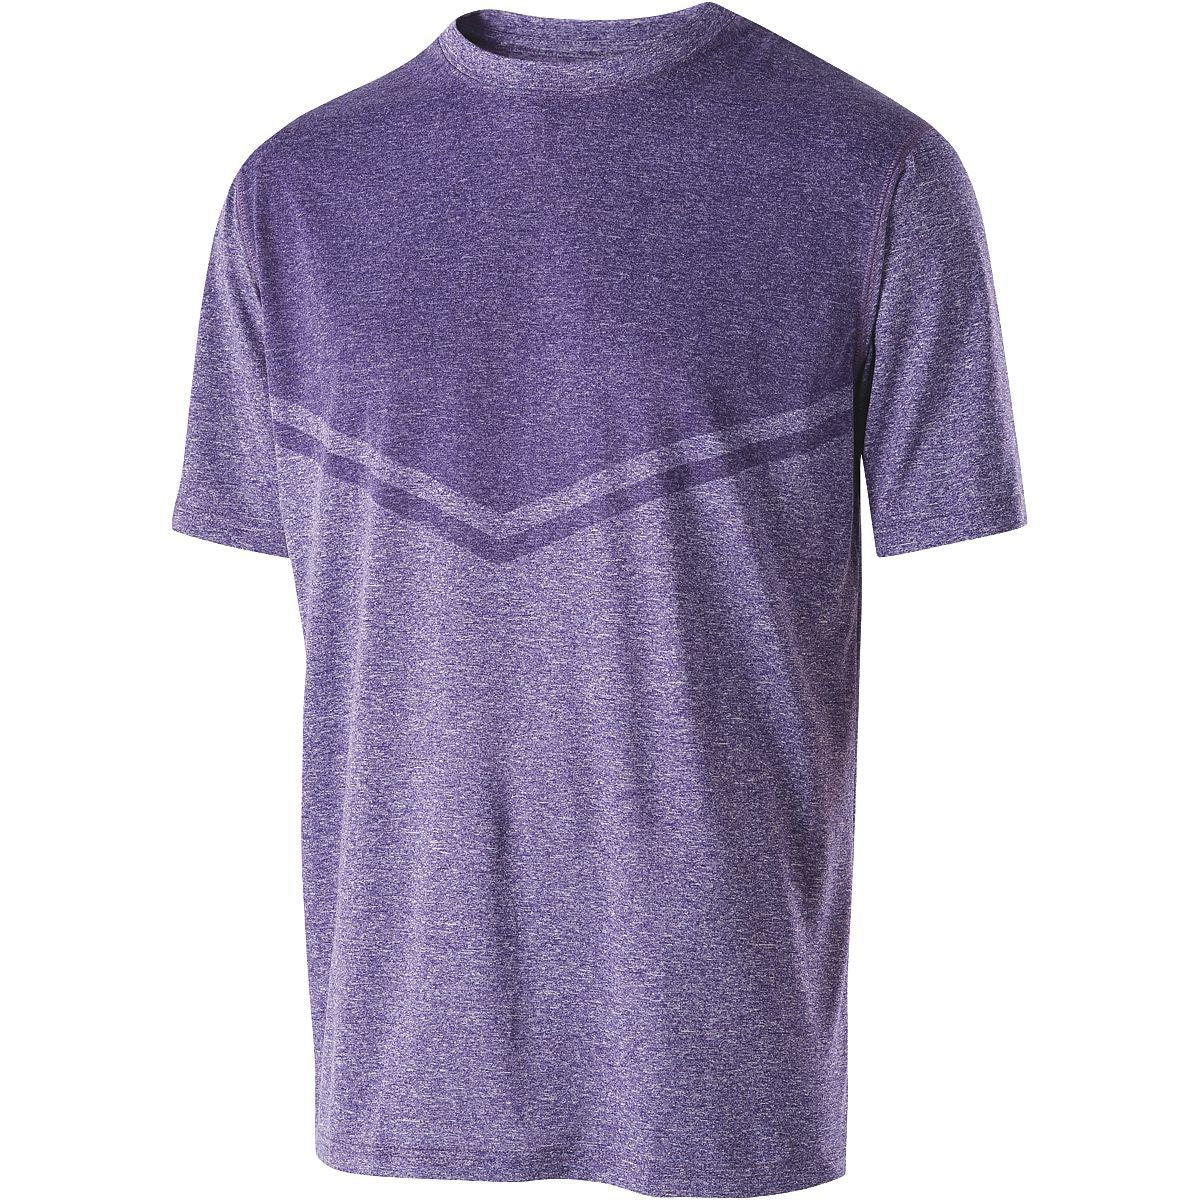 Holloway Youth Seismic Tee in Purple Heather  -Part of the Youth, Youth-Tee-Shirt, T-Shirts, Holloway, Shirts product lines at KanaleyCreations.com